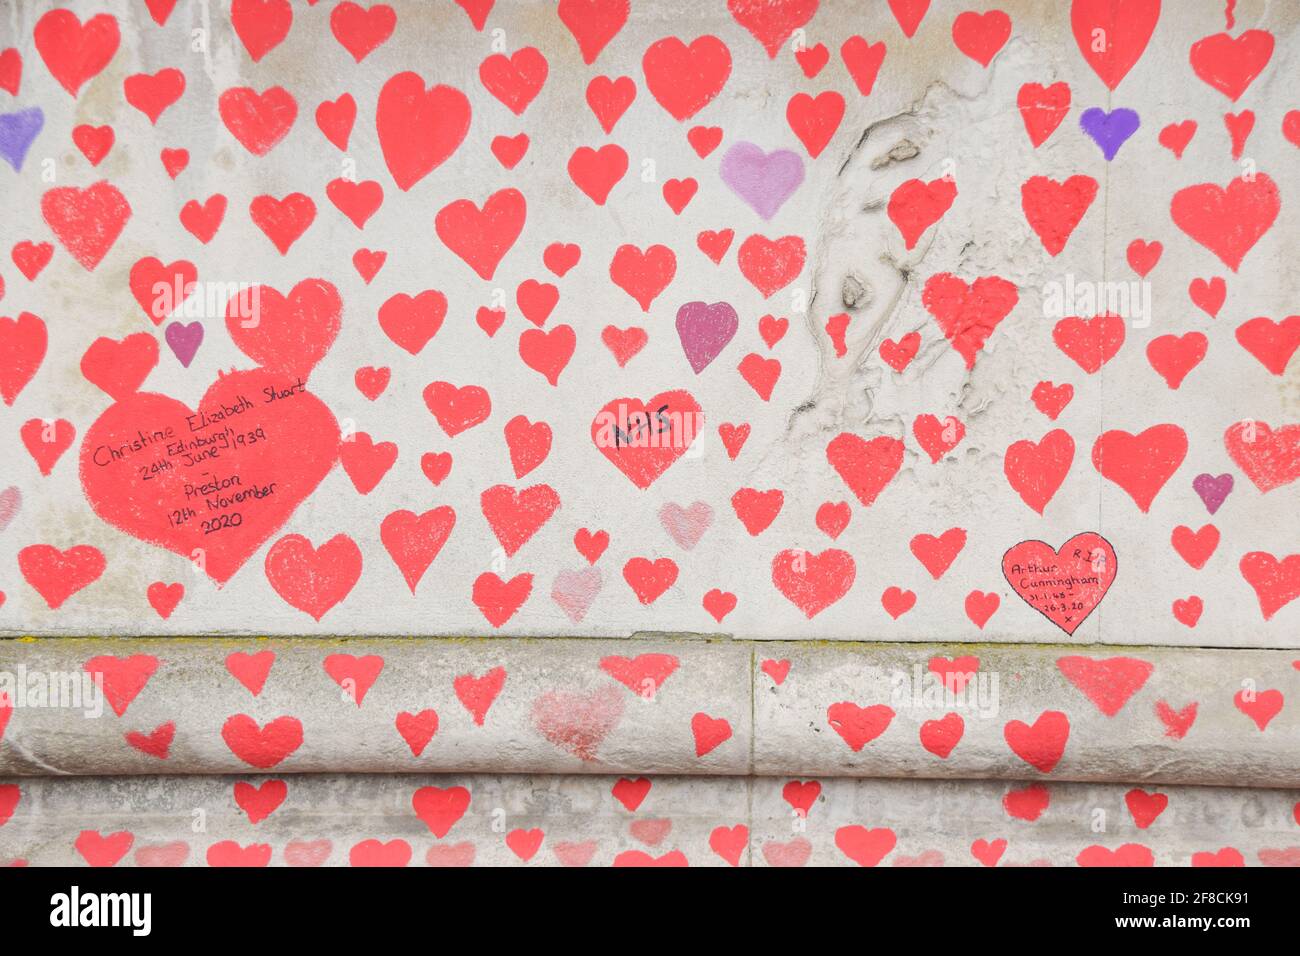 London, United Kingdom. 13th April 2021. Red hearts on the National Covid Memorial Wall outside St Thomas' Hospital. 150,000 red hearts have been painted by volunteers and members of the public, one for each life lost to Covid in the UK to date. Stock Photo